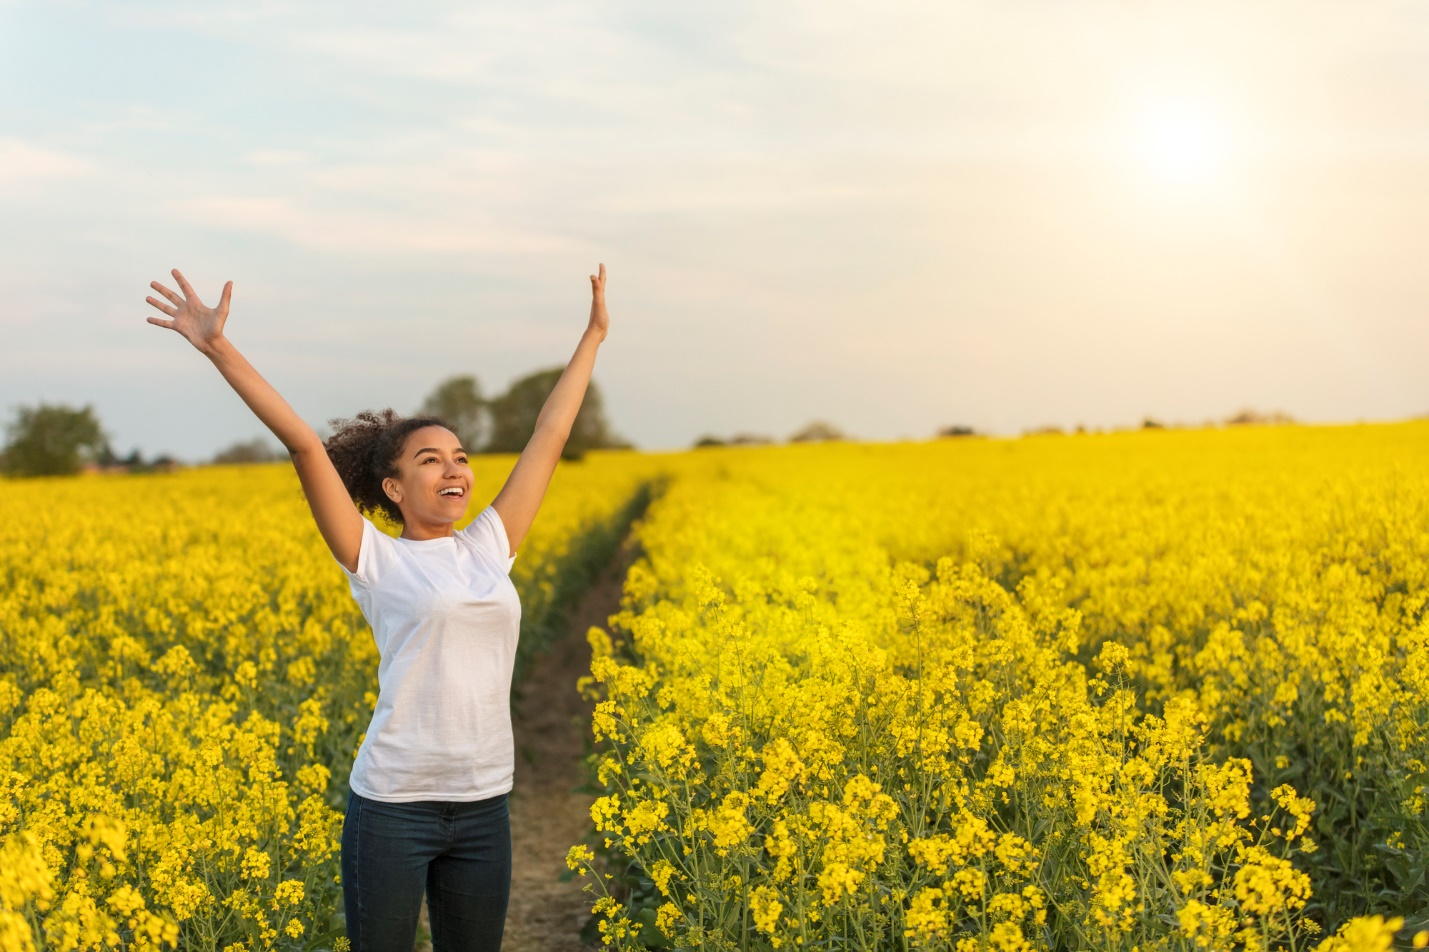 A person standing in a field of yellow flowers with his arms raised

Description automatically generated with medium confidence